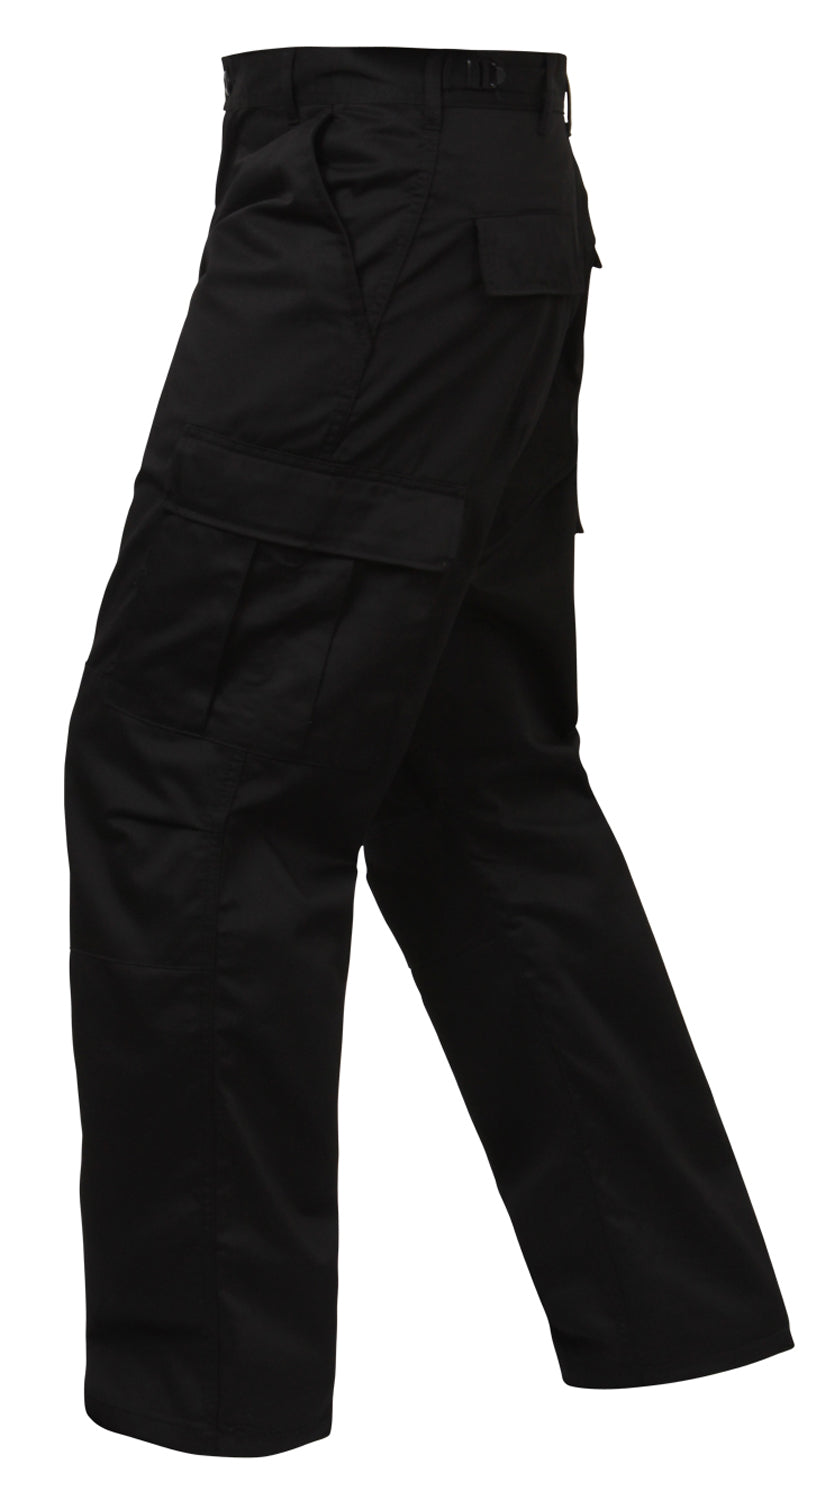 Rothco Relaxed Fit Solid Colors Zipper Fly BDU Cargo Pants